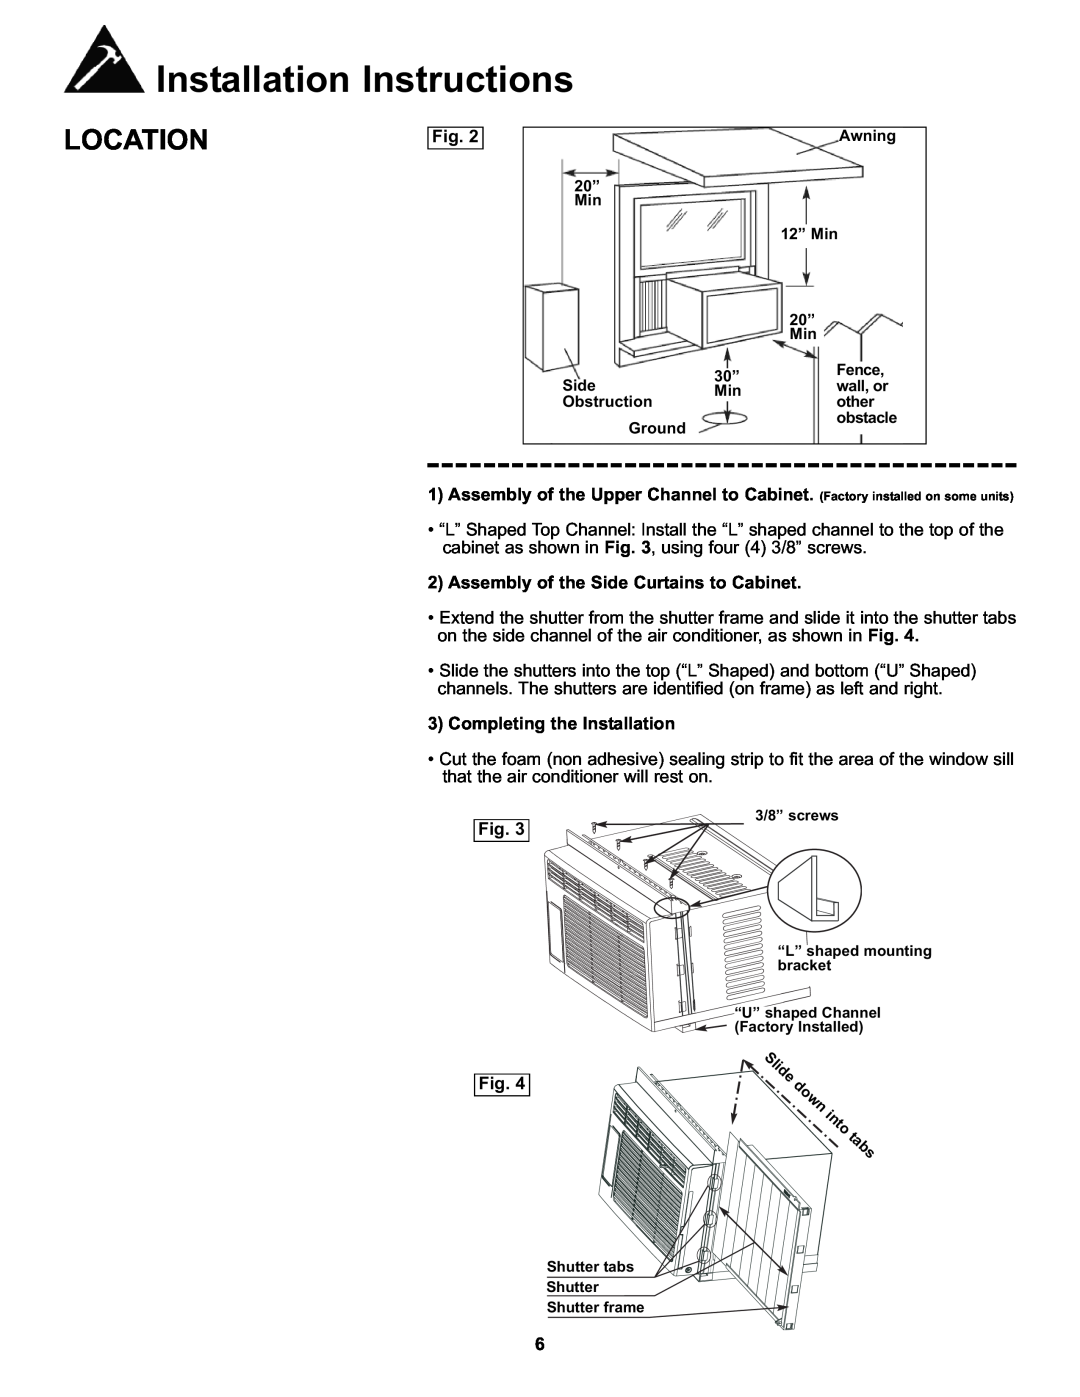 Danby DAC8011E Assembly of the Side Curtains to Cabinet, Completing the Installation, Installation Instructions, Location 